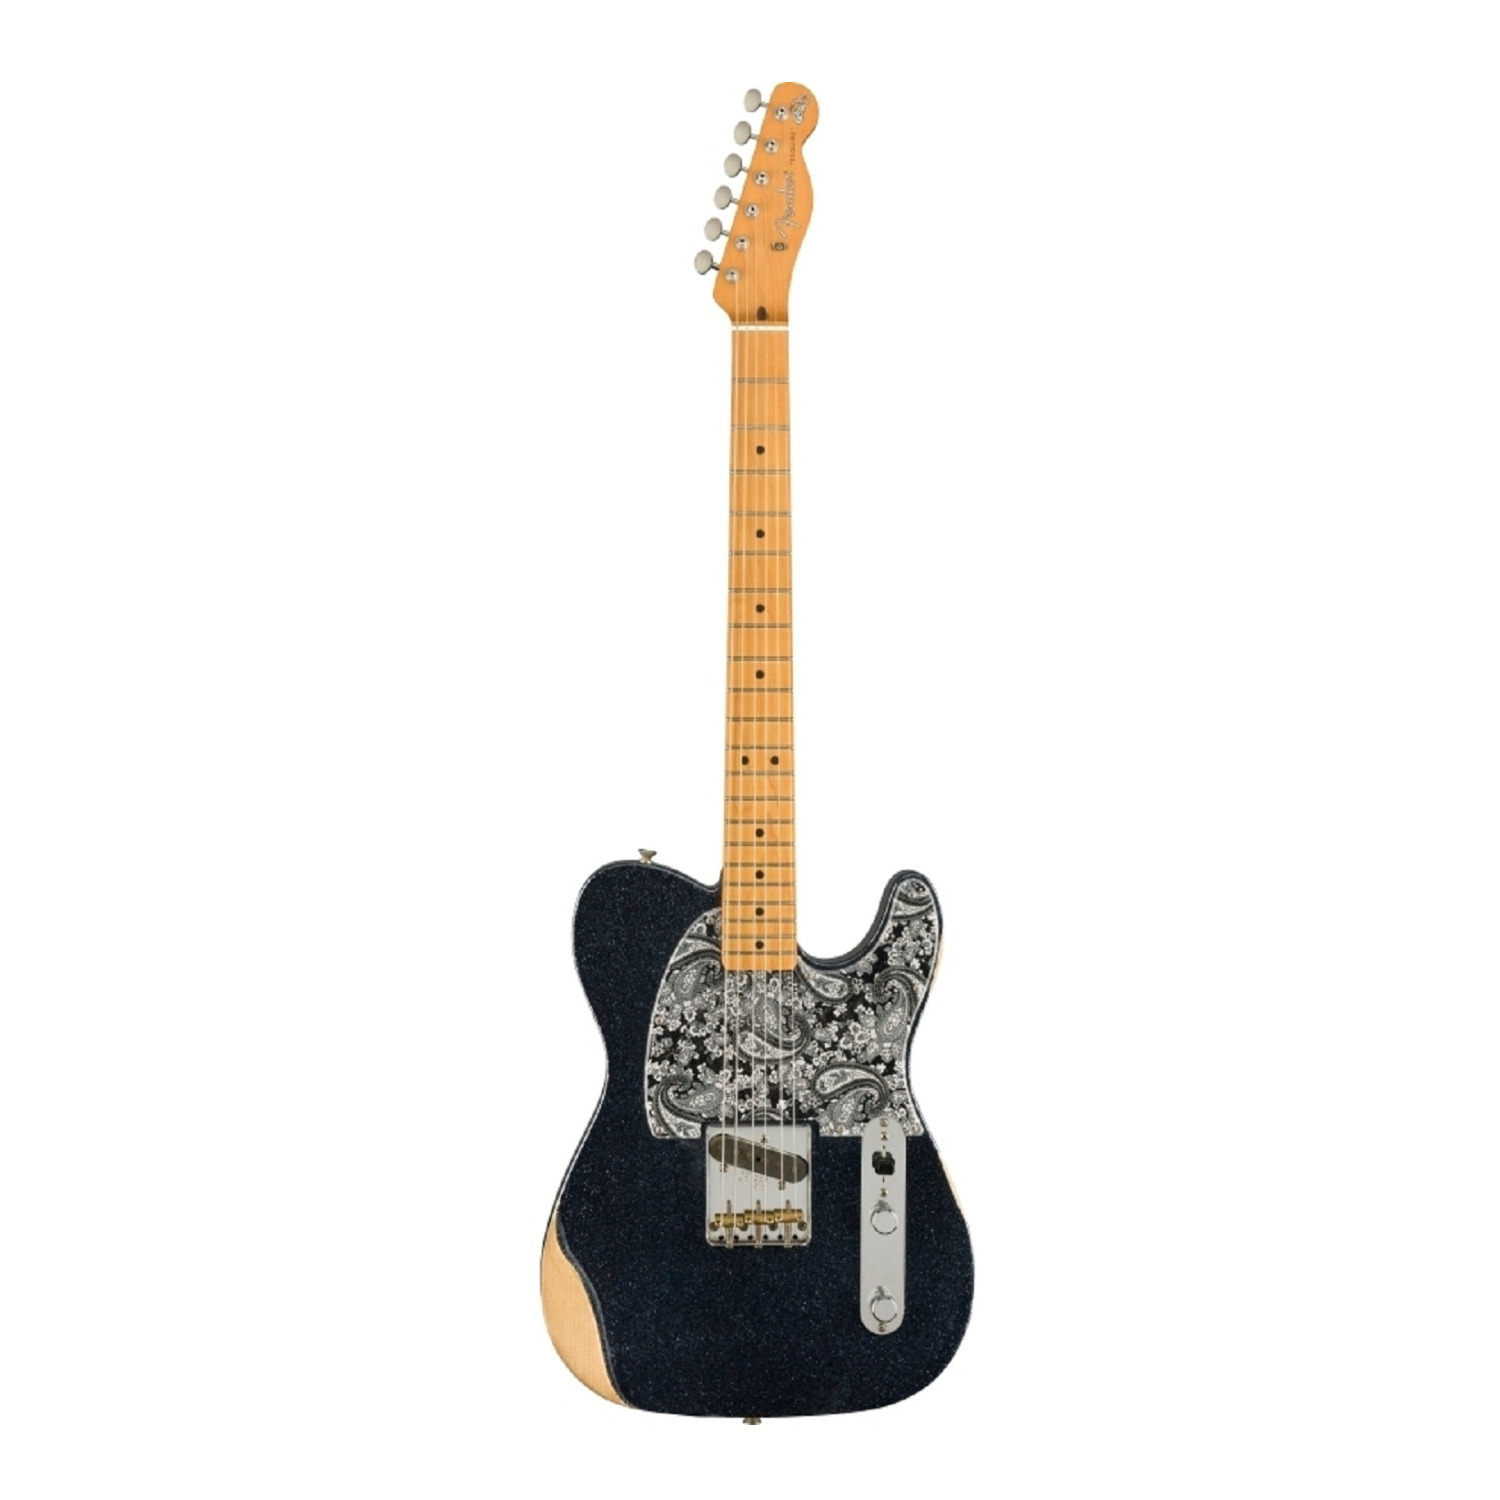 Fender Brad Paisley Esquire 6-String Electric Guitar (Right-Hand, Black Sparkle) -  0140322398